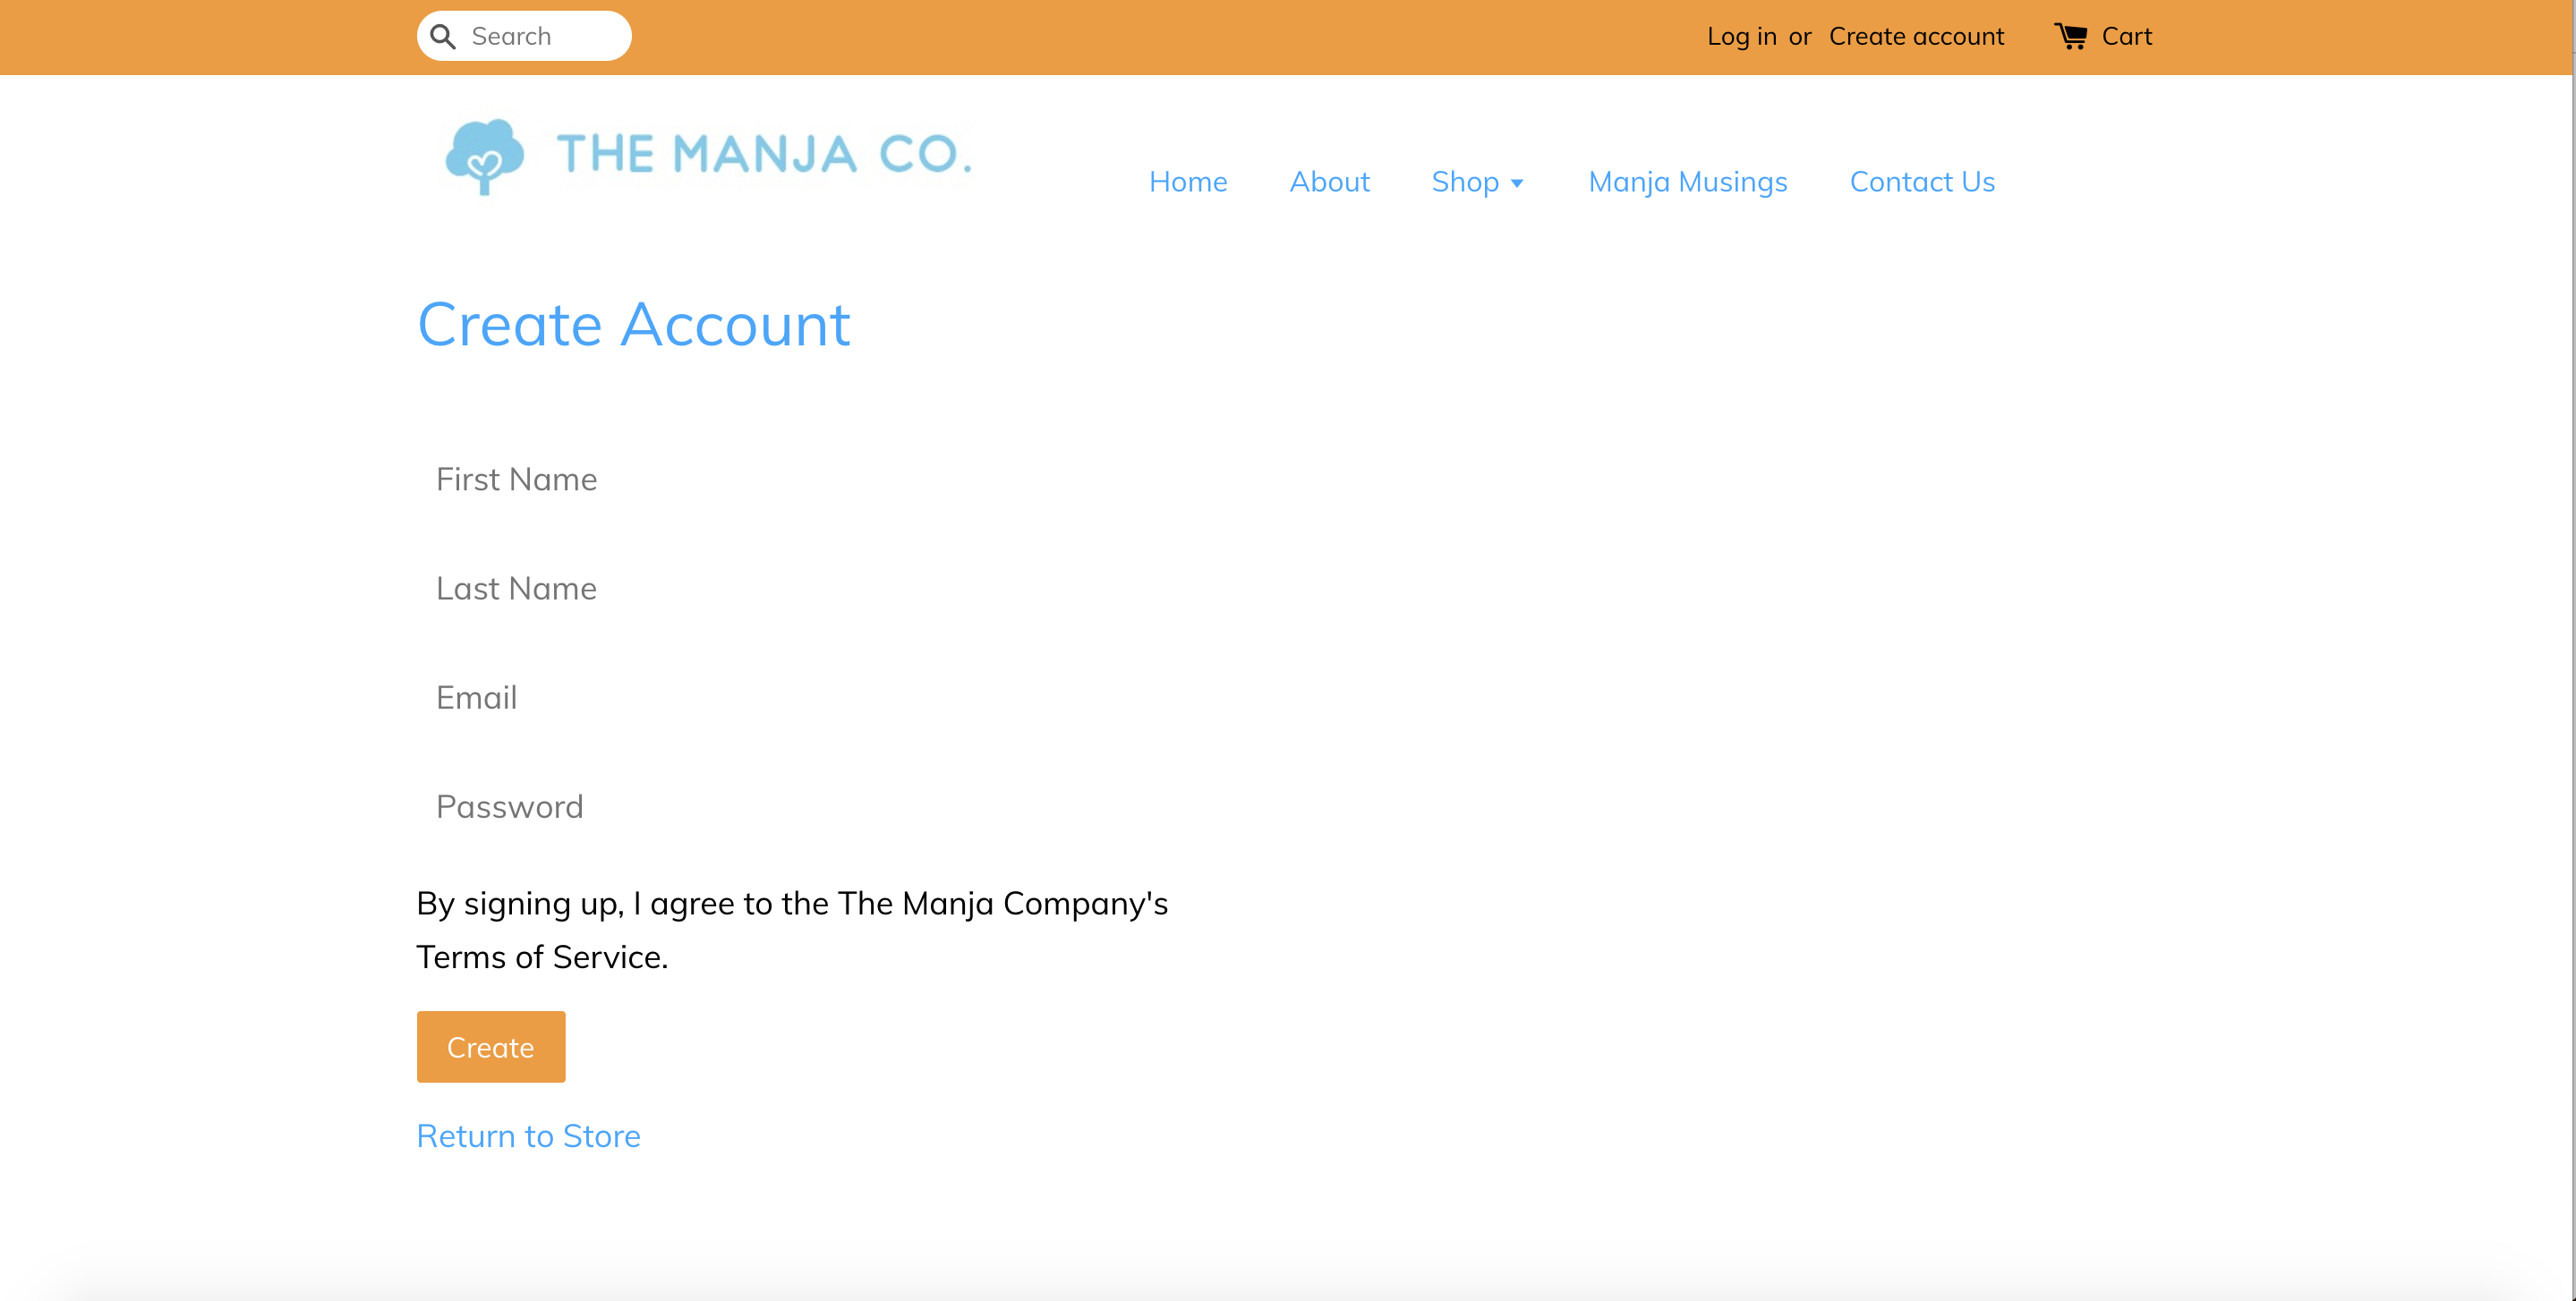 The Manja Company website’s pick up order guide. Step 1 in the ordering process. Screenshot shows how to create / register an account or login. "Nappies by The Manja Company" is the hot new baby diapers brand in Malaysia.